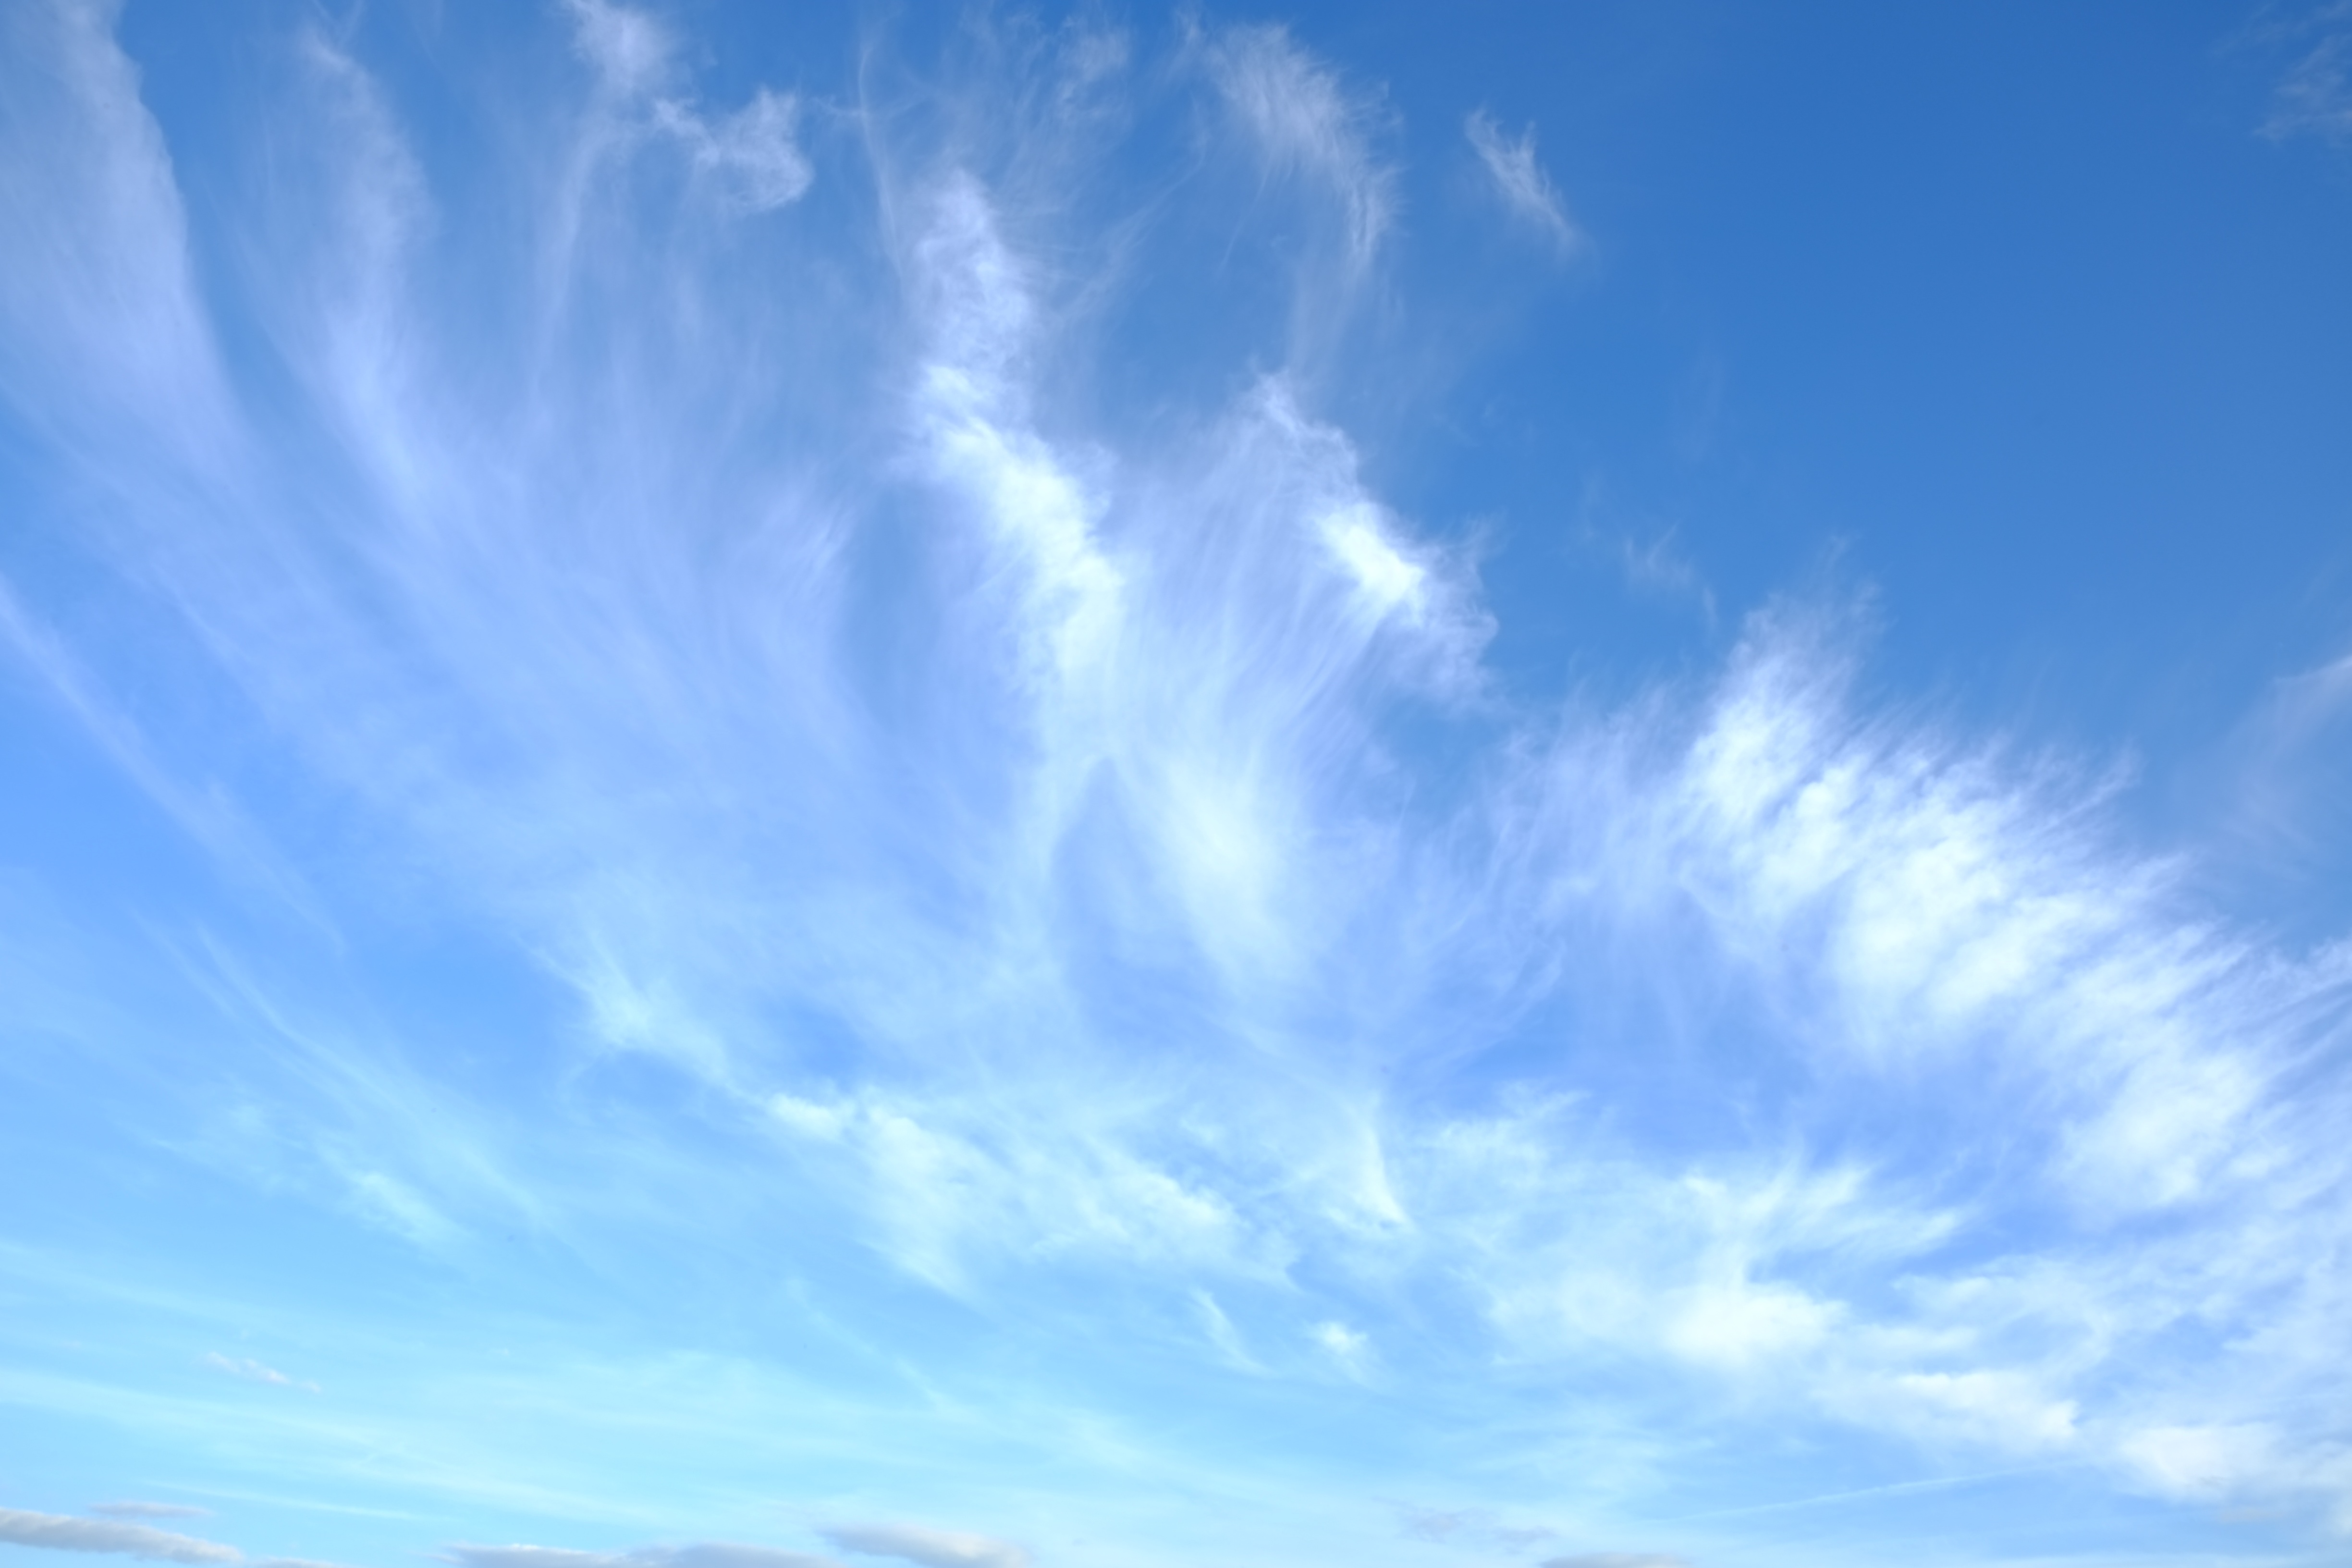 Blue Sky With Clouds Images - Free Images | Bodyshwasume Wallpaper